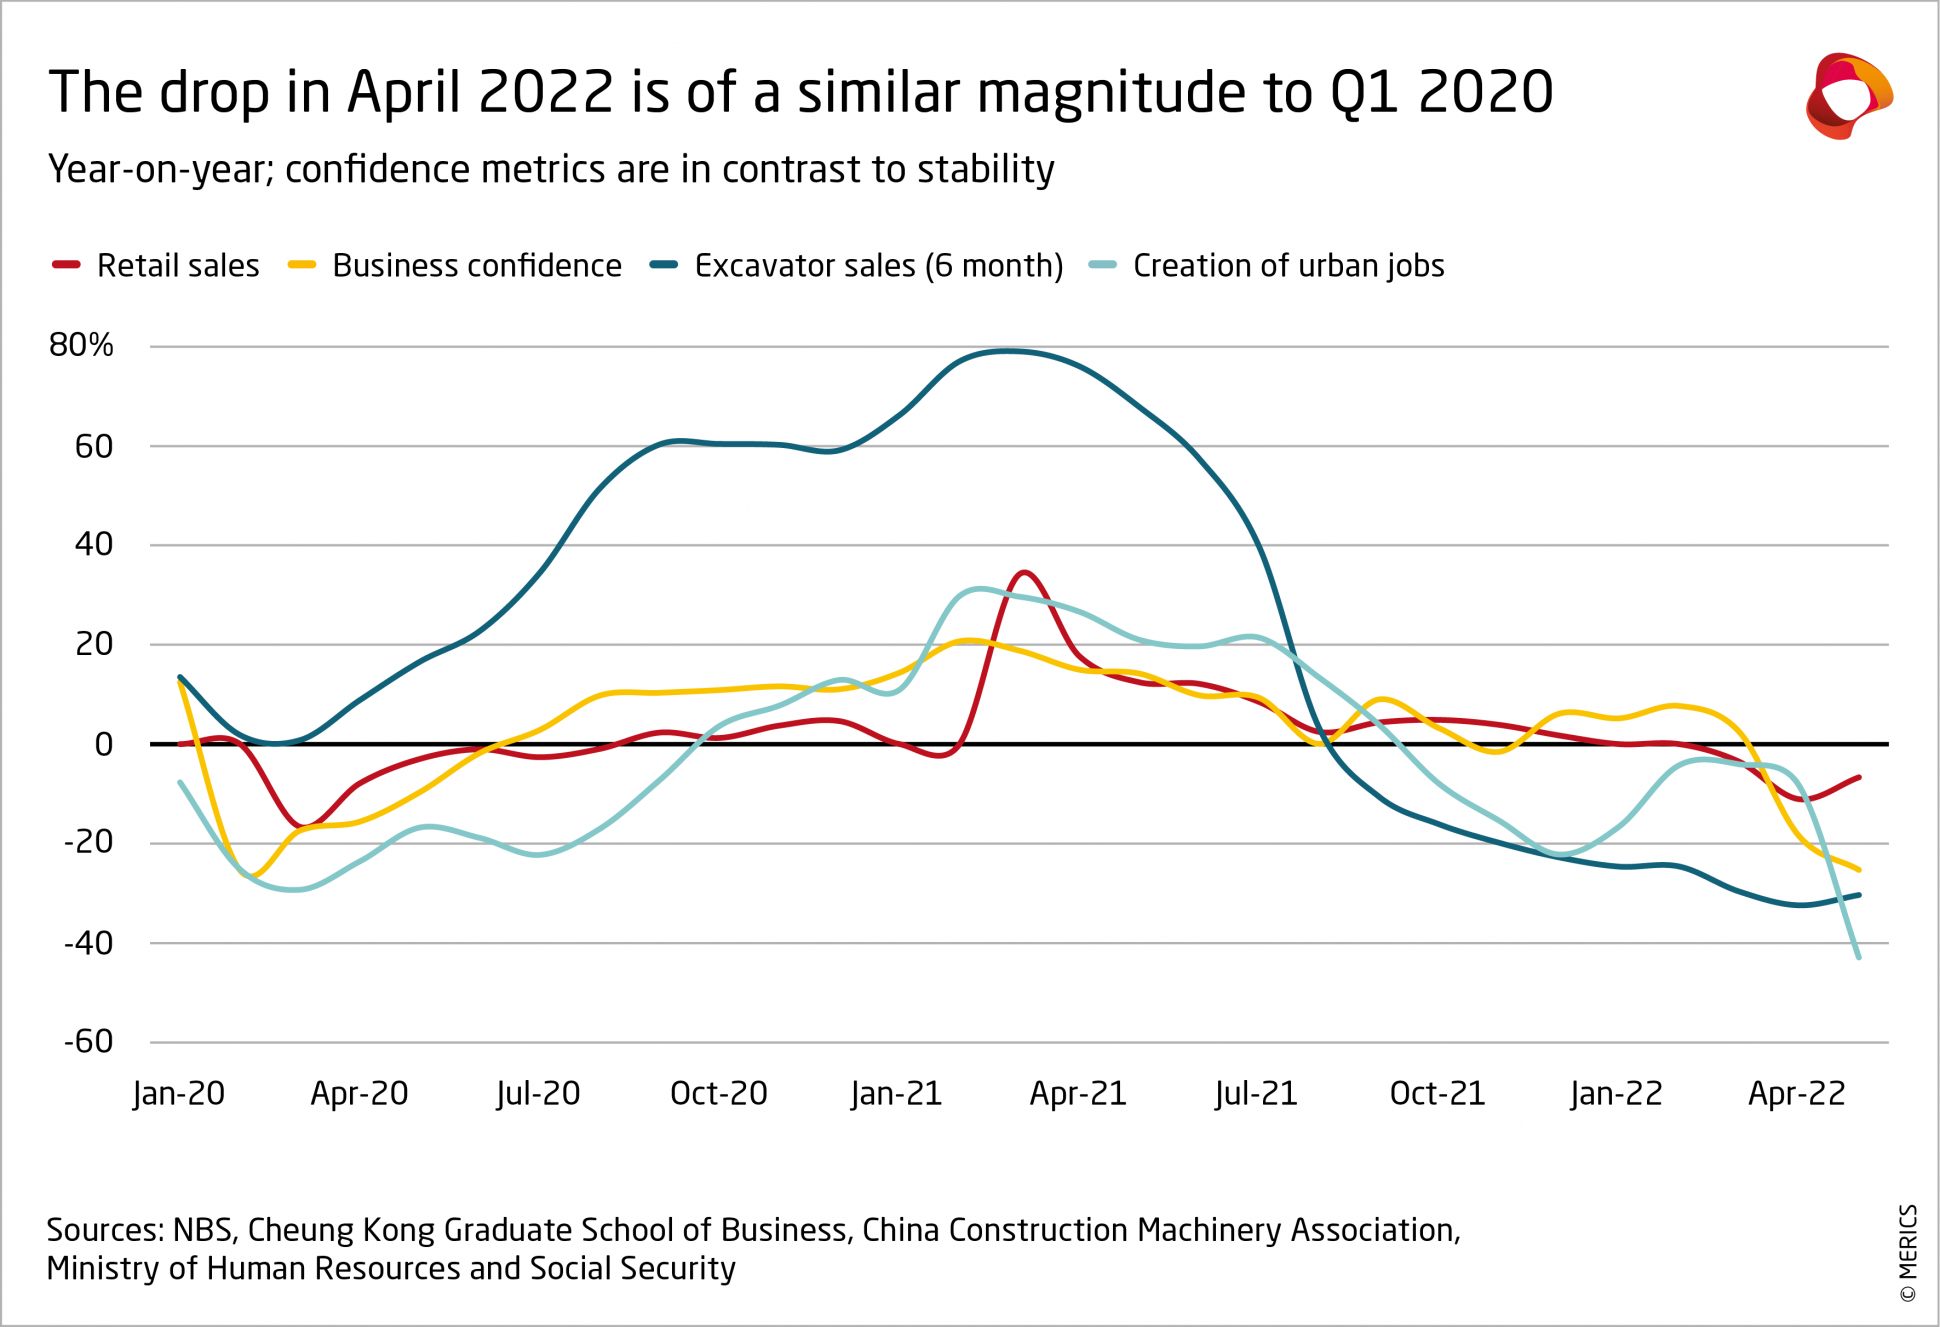 MERICS_The-drop-in-April-2022-is-of-a-similar-magnitude-to-Q1-2020.png